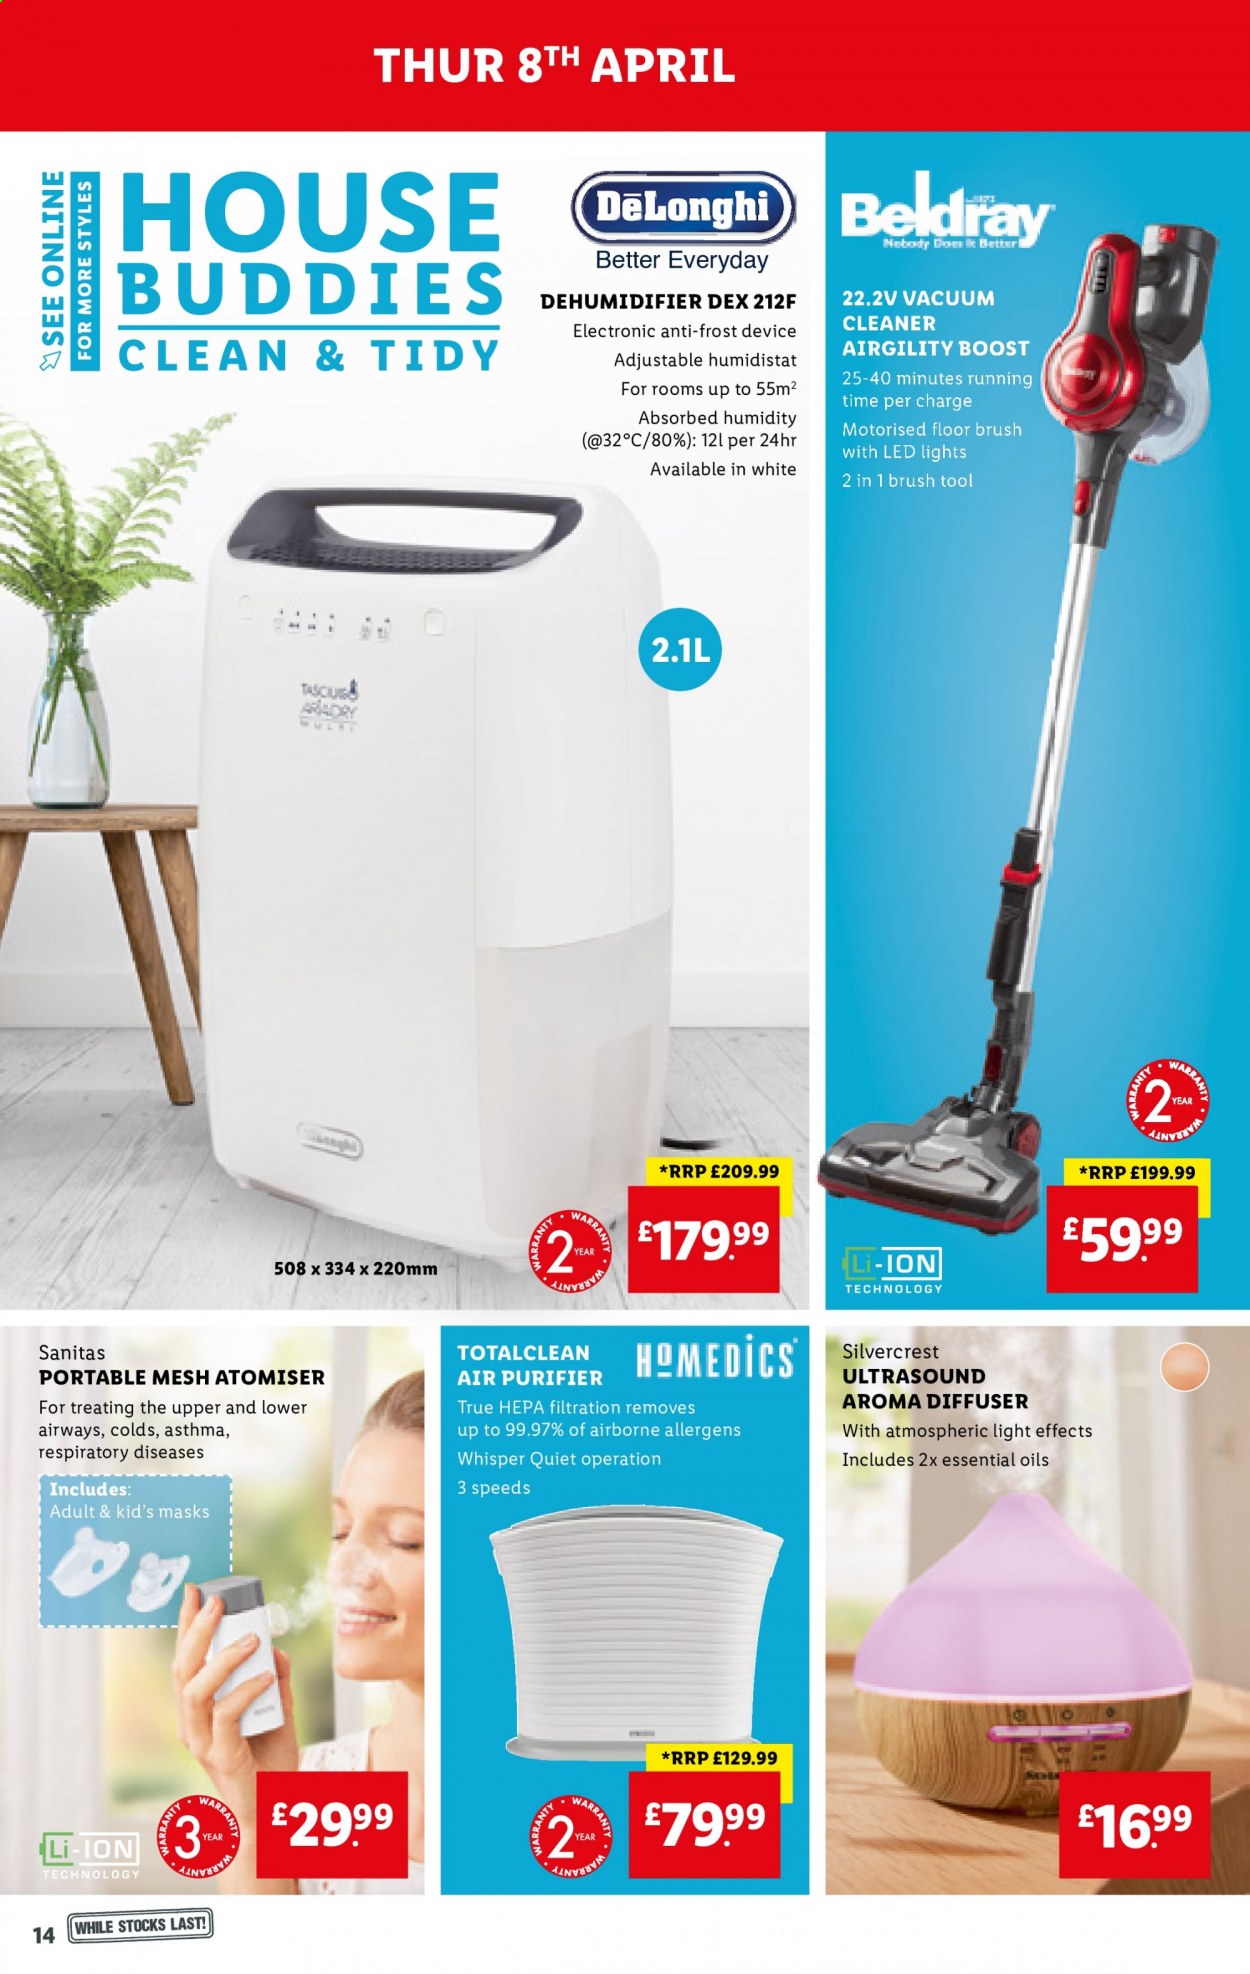 thumbnail - Lidl offer  - 08/04/2021 - 14/04/2021 - Sales products - SilverCrest, Boost, cleaner, Whisper, diffuser, essential oils, air purifier, vacuum cleaner, LED light. Page 14.